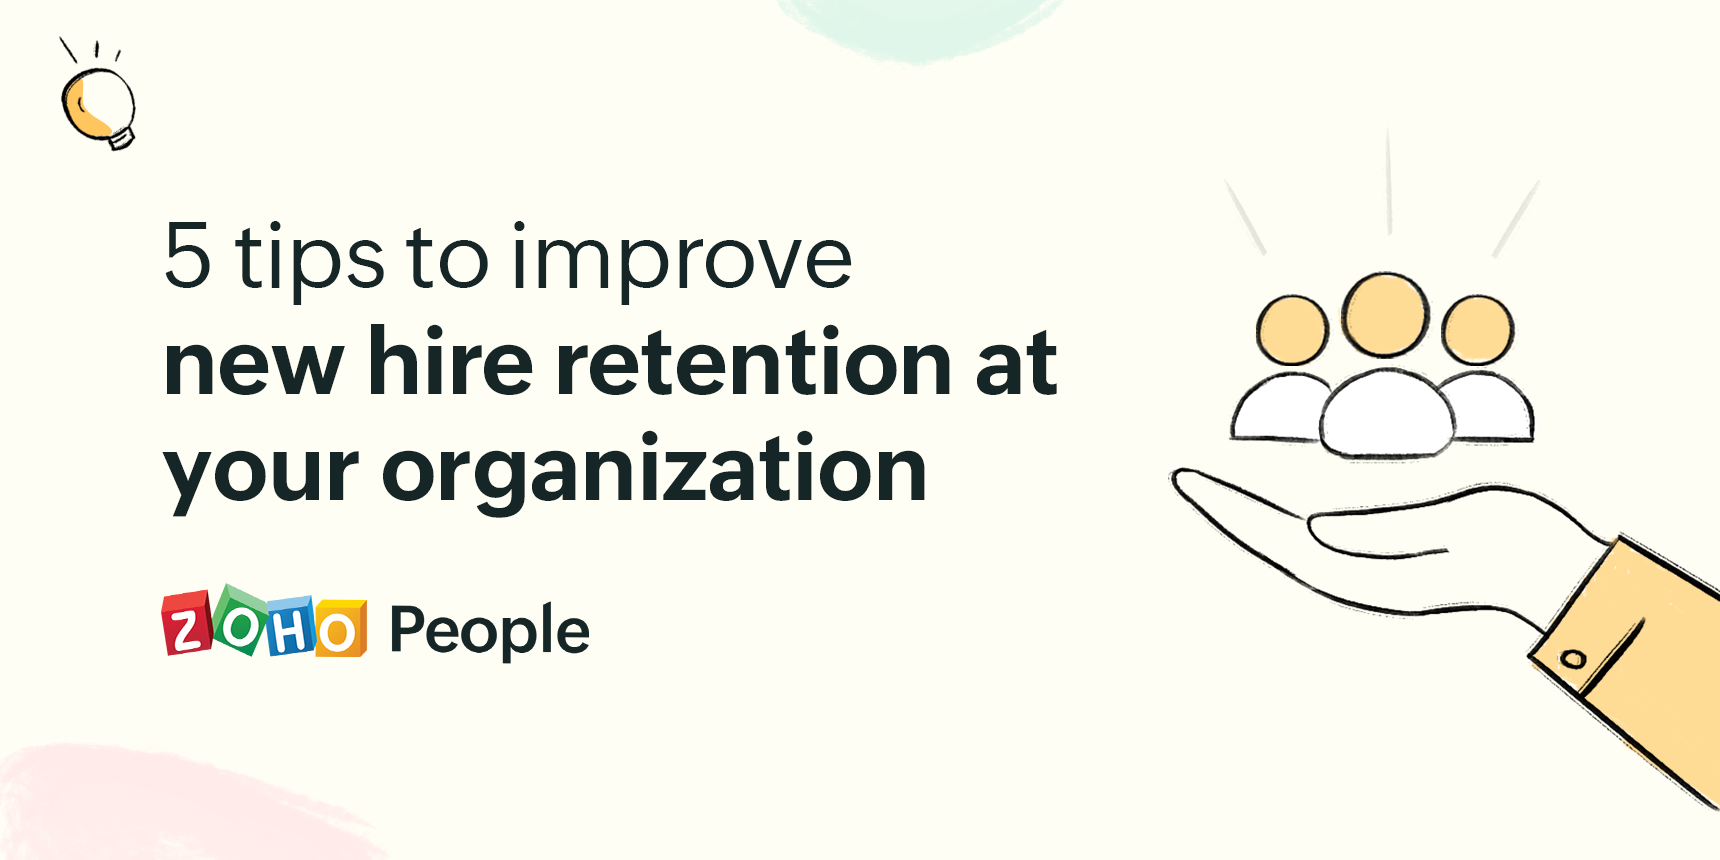 Tips to improve new hire retention